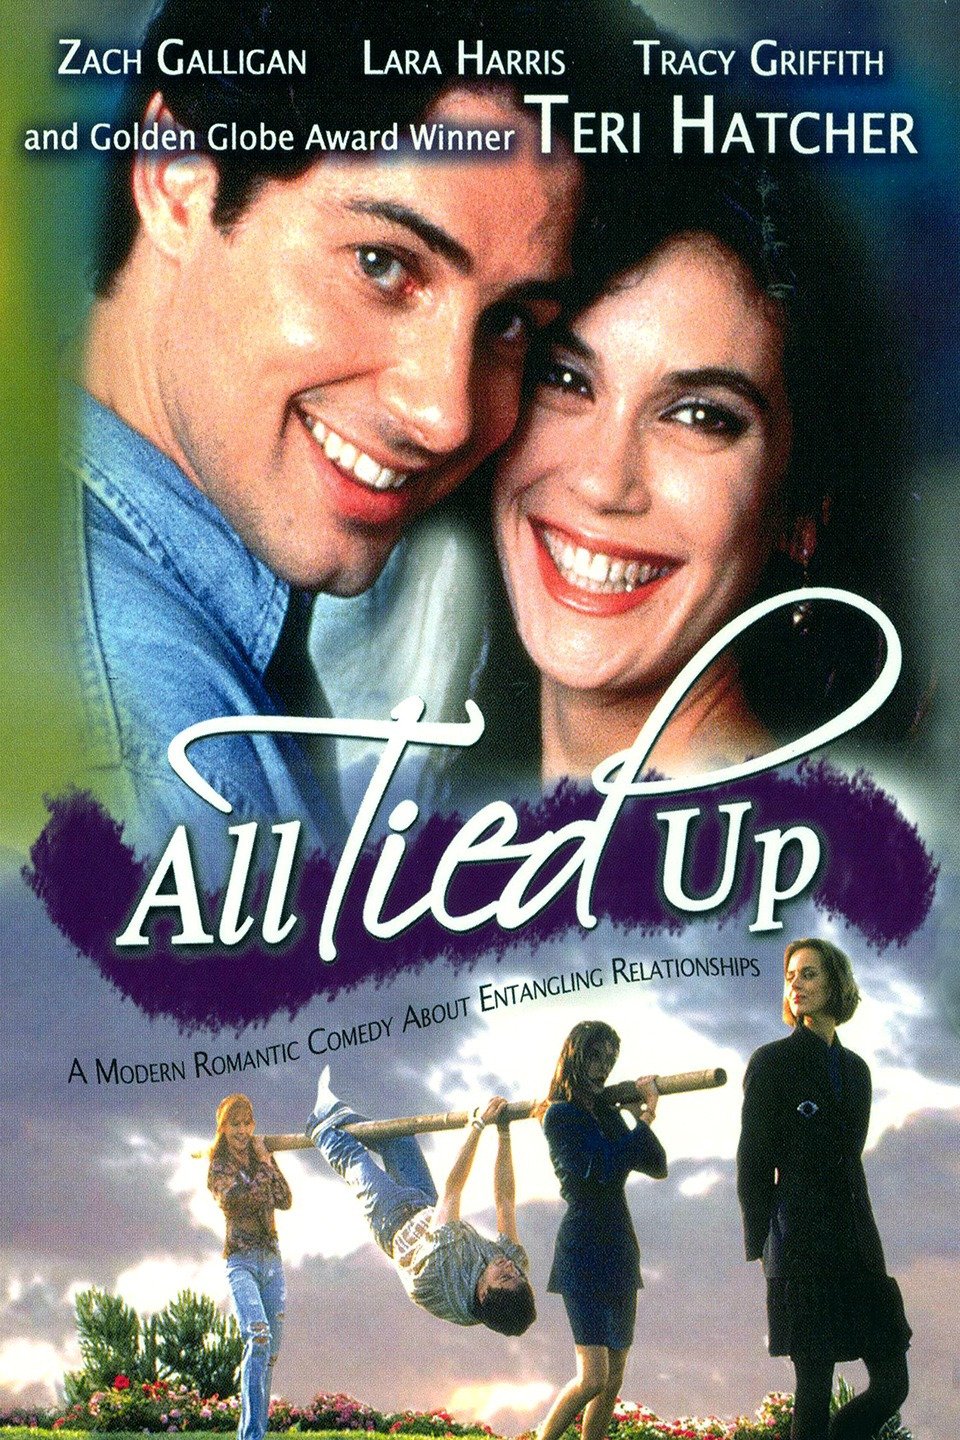 all tied up movie review